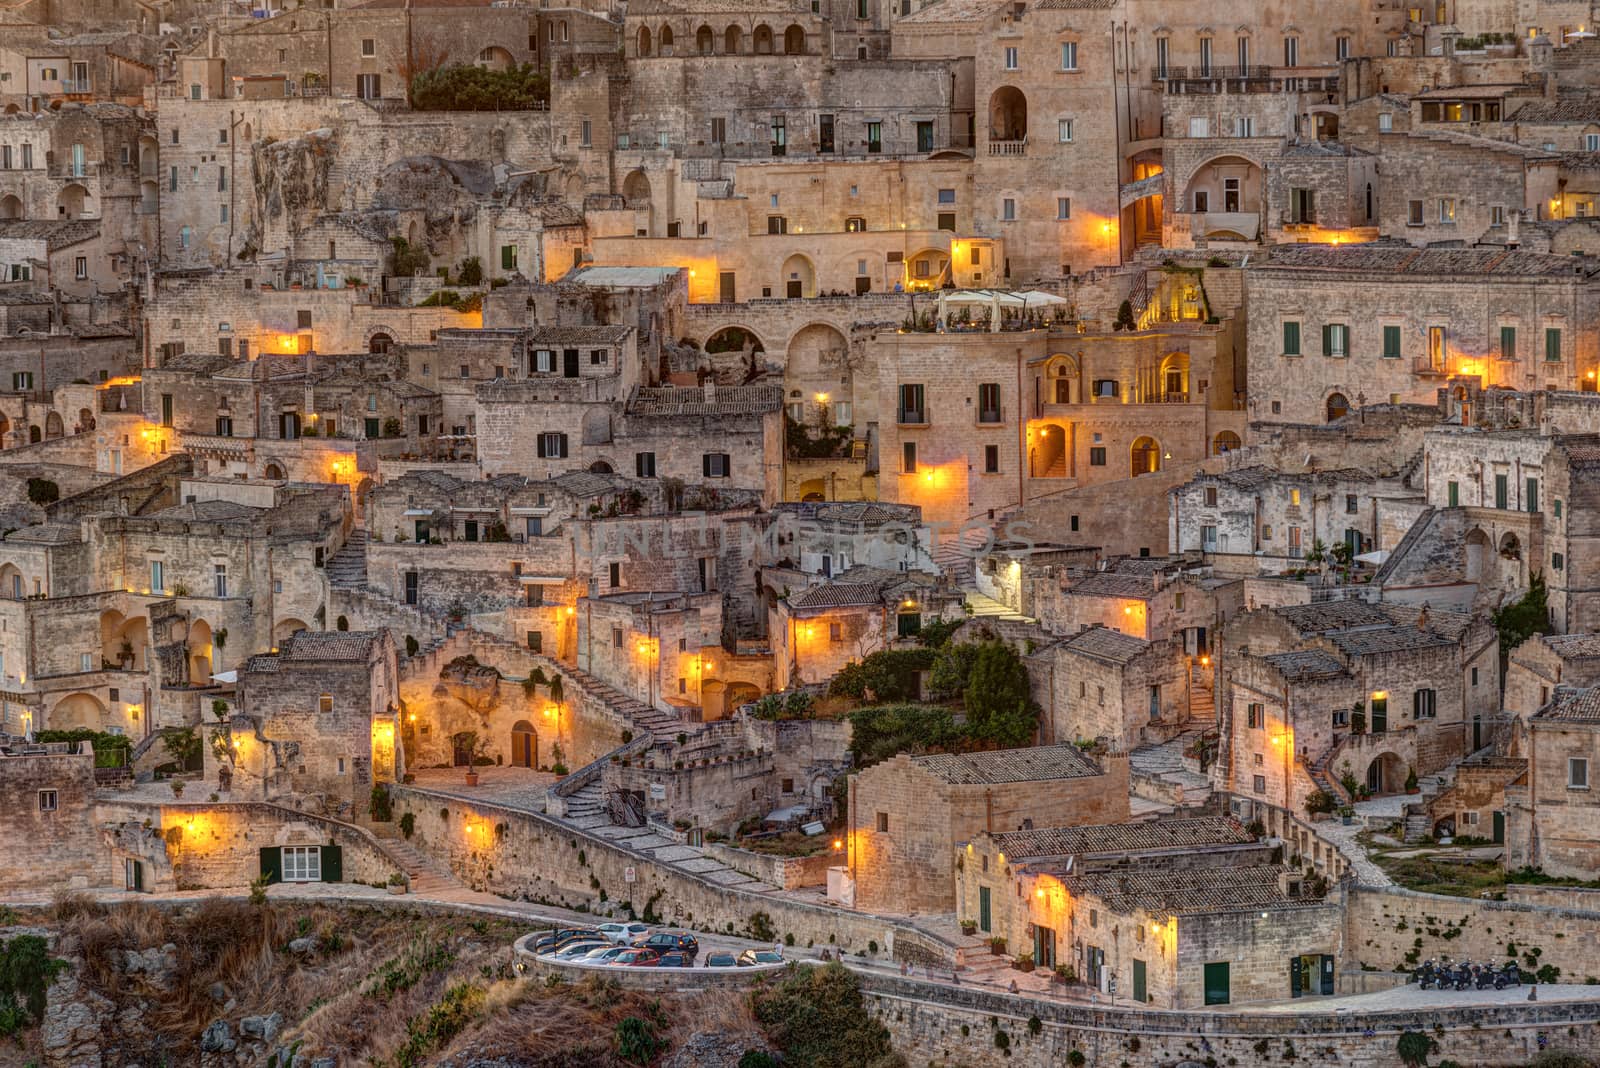 Detail of the old town of Matera in Italy at dusk